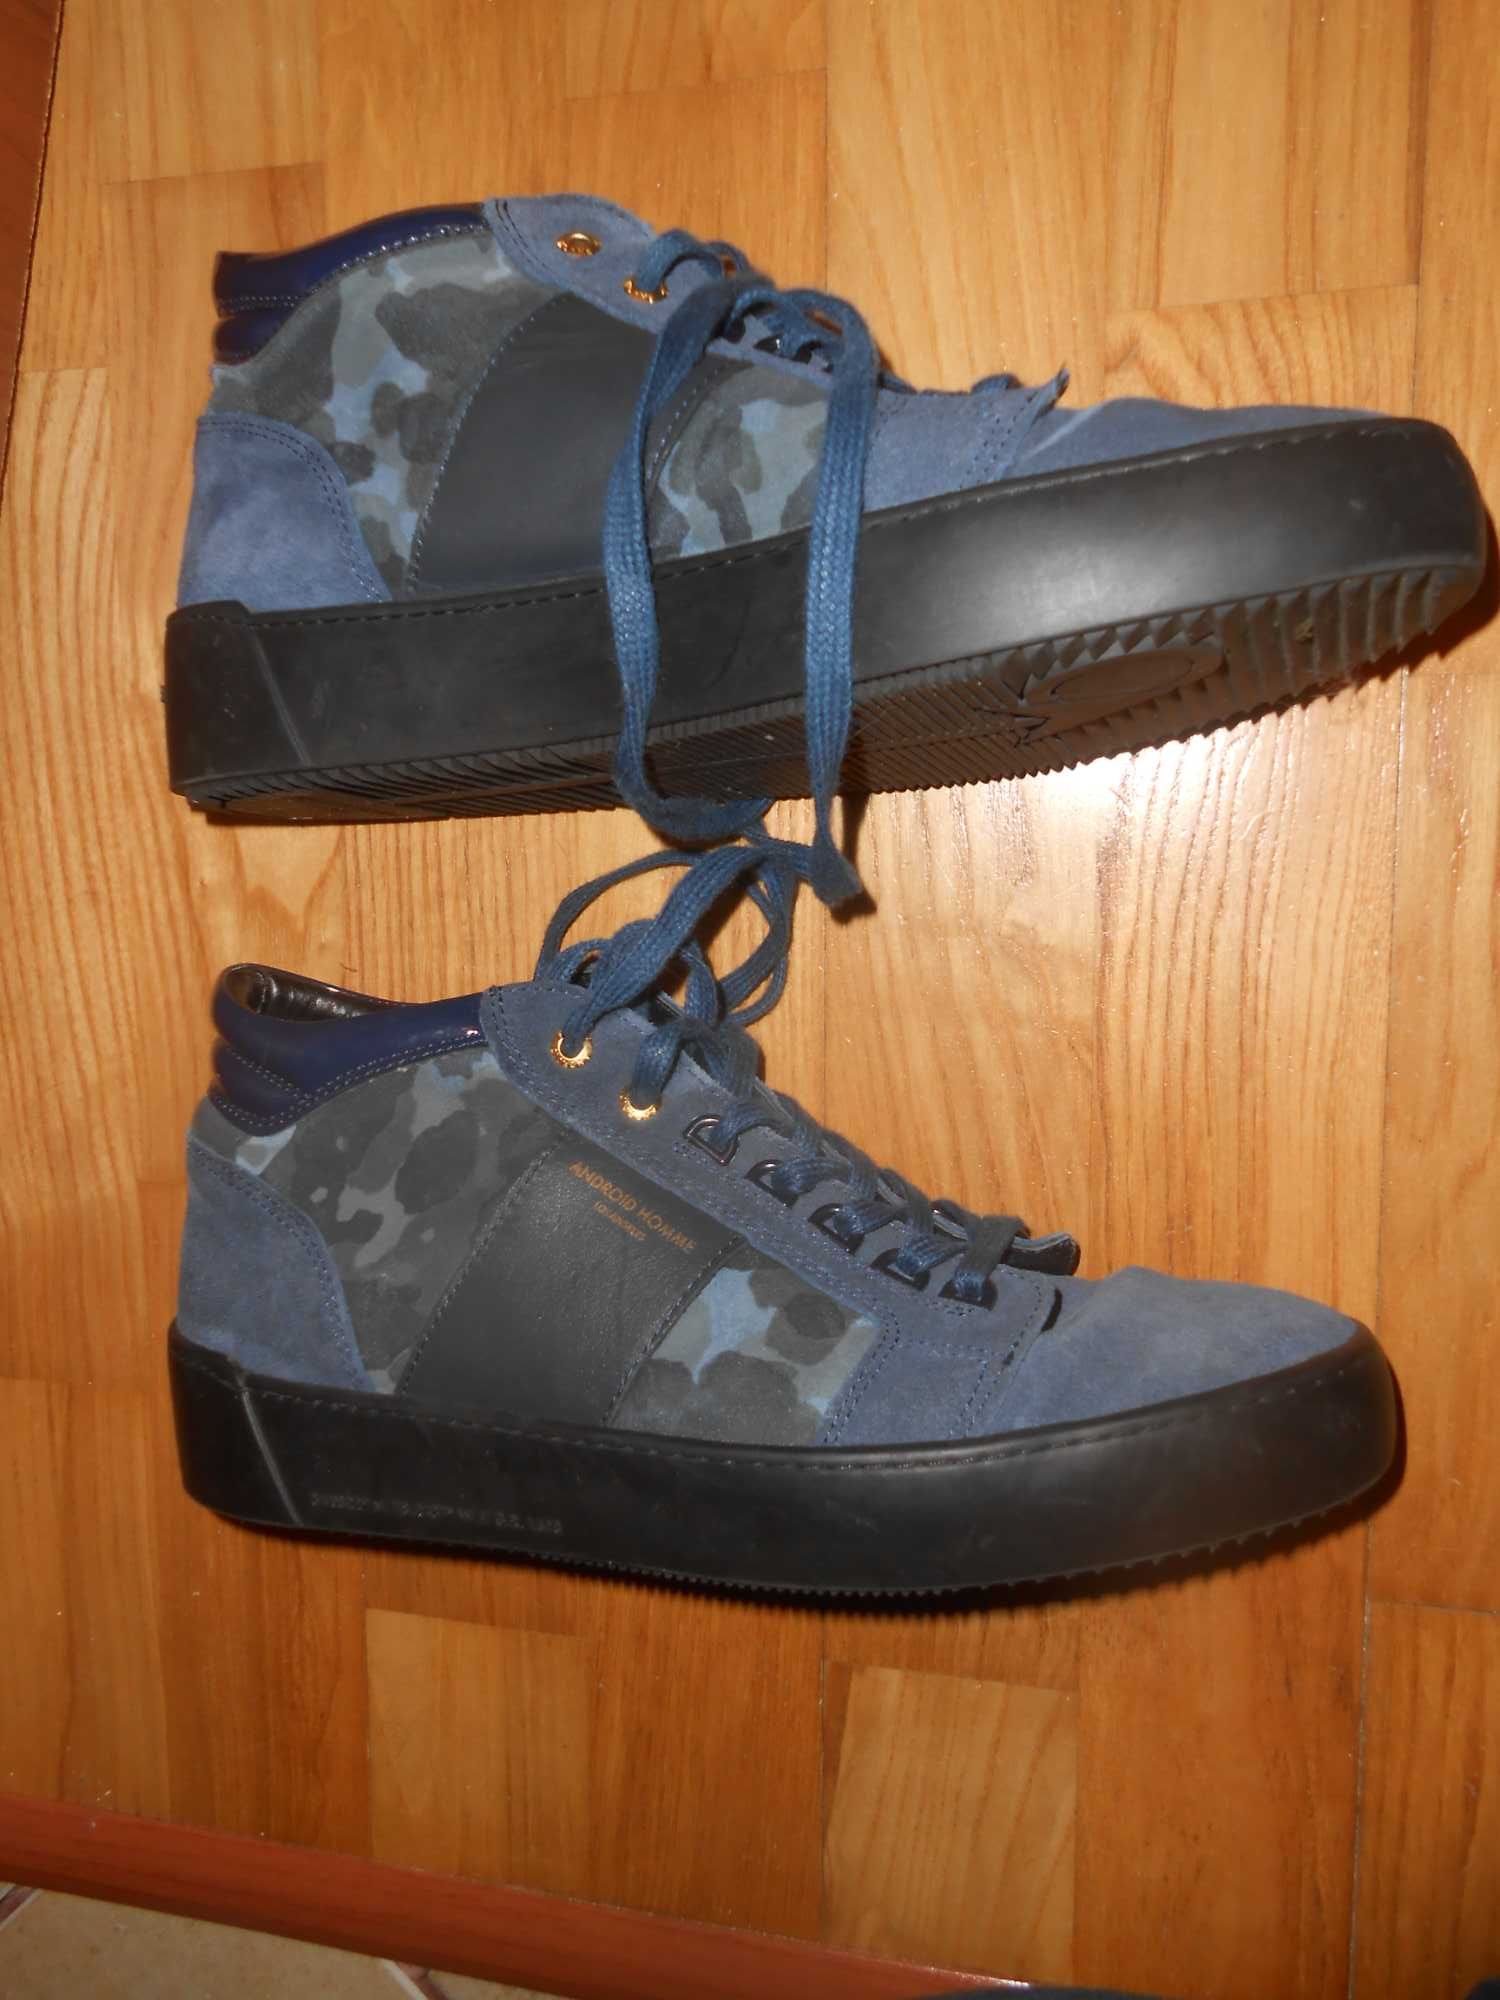 Android Homme Los Angeles buty męskie 43/27,5 cm